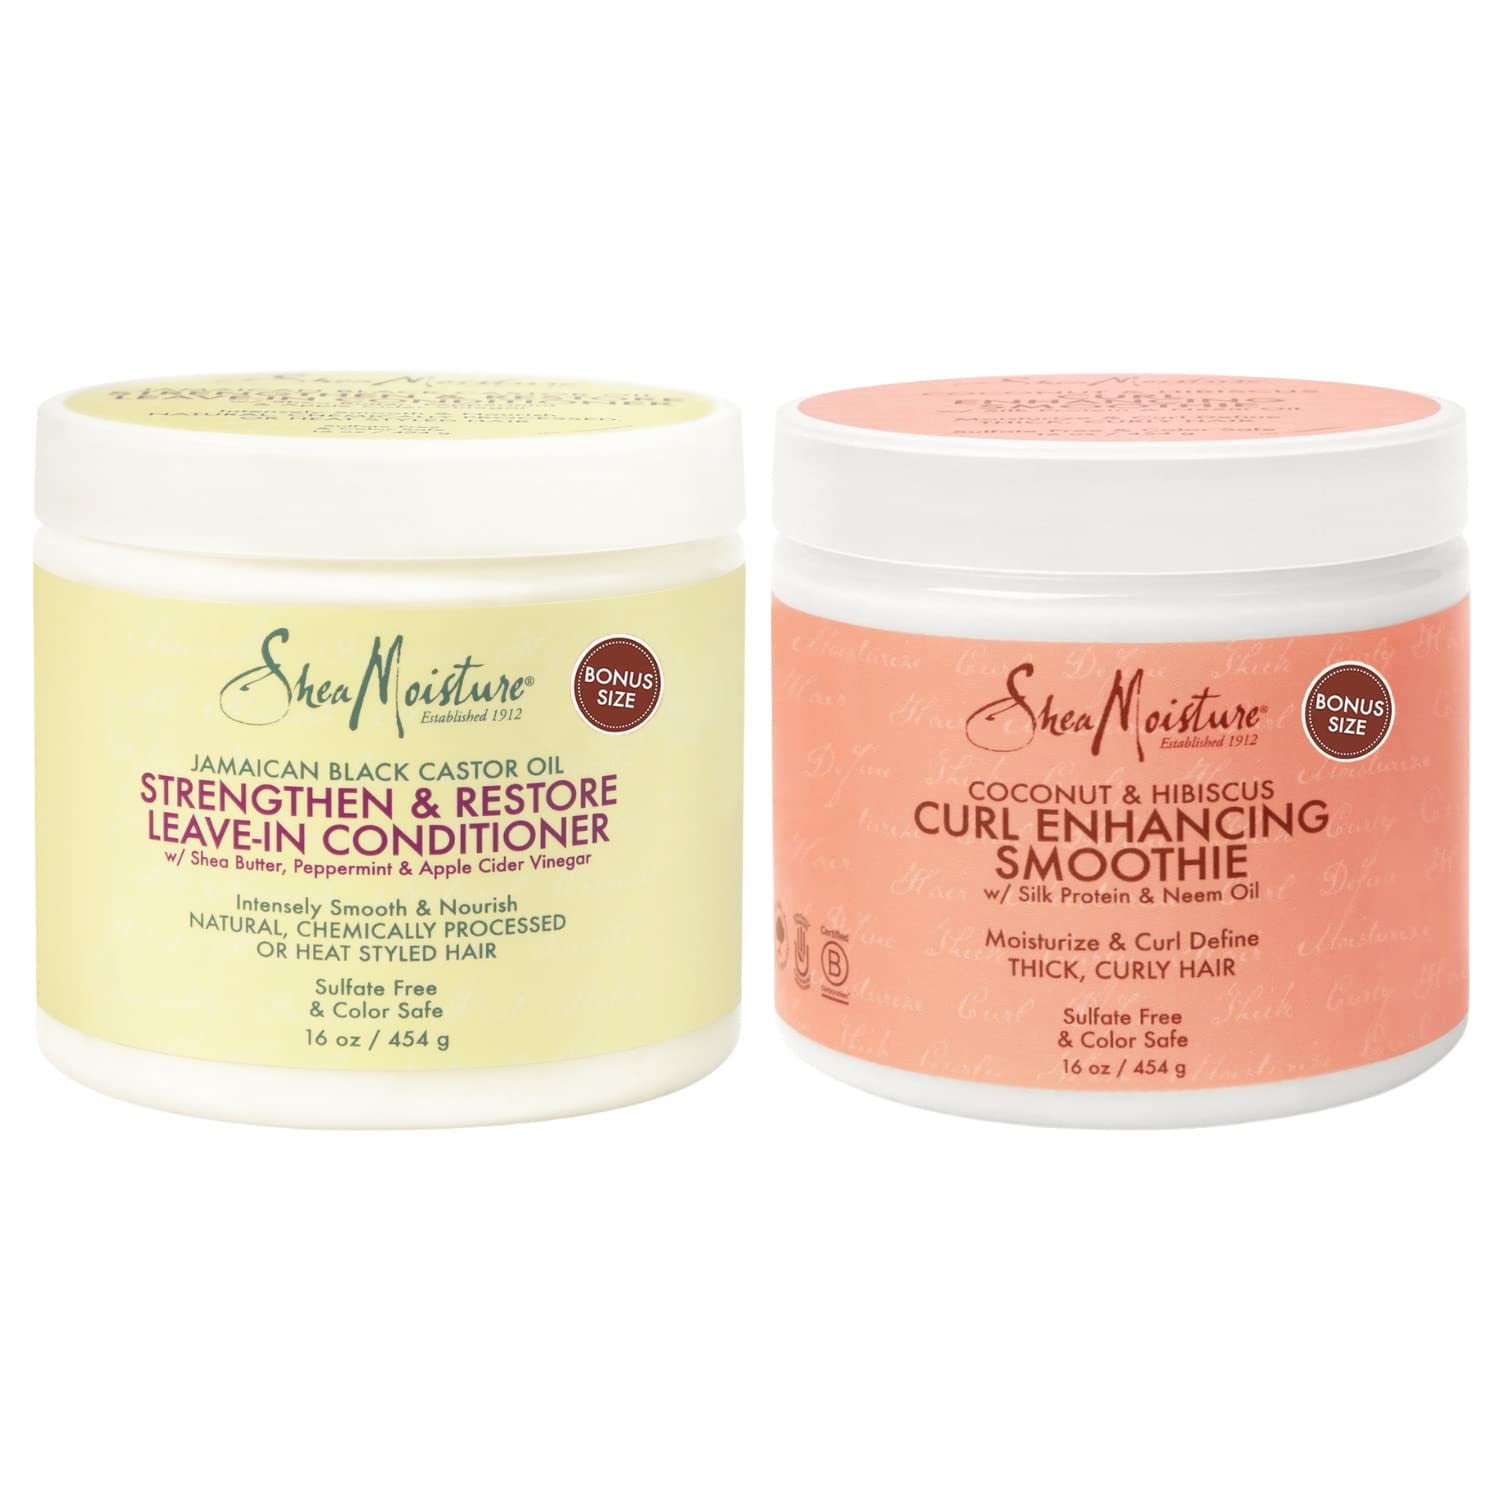 Image of Shea Moisture Curl Enhancing Smoothie product for black girls